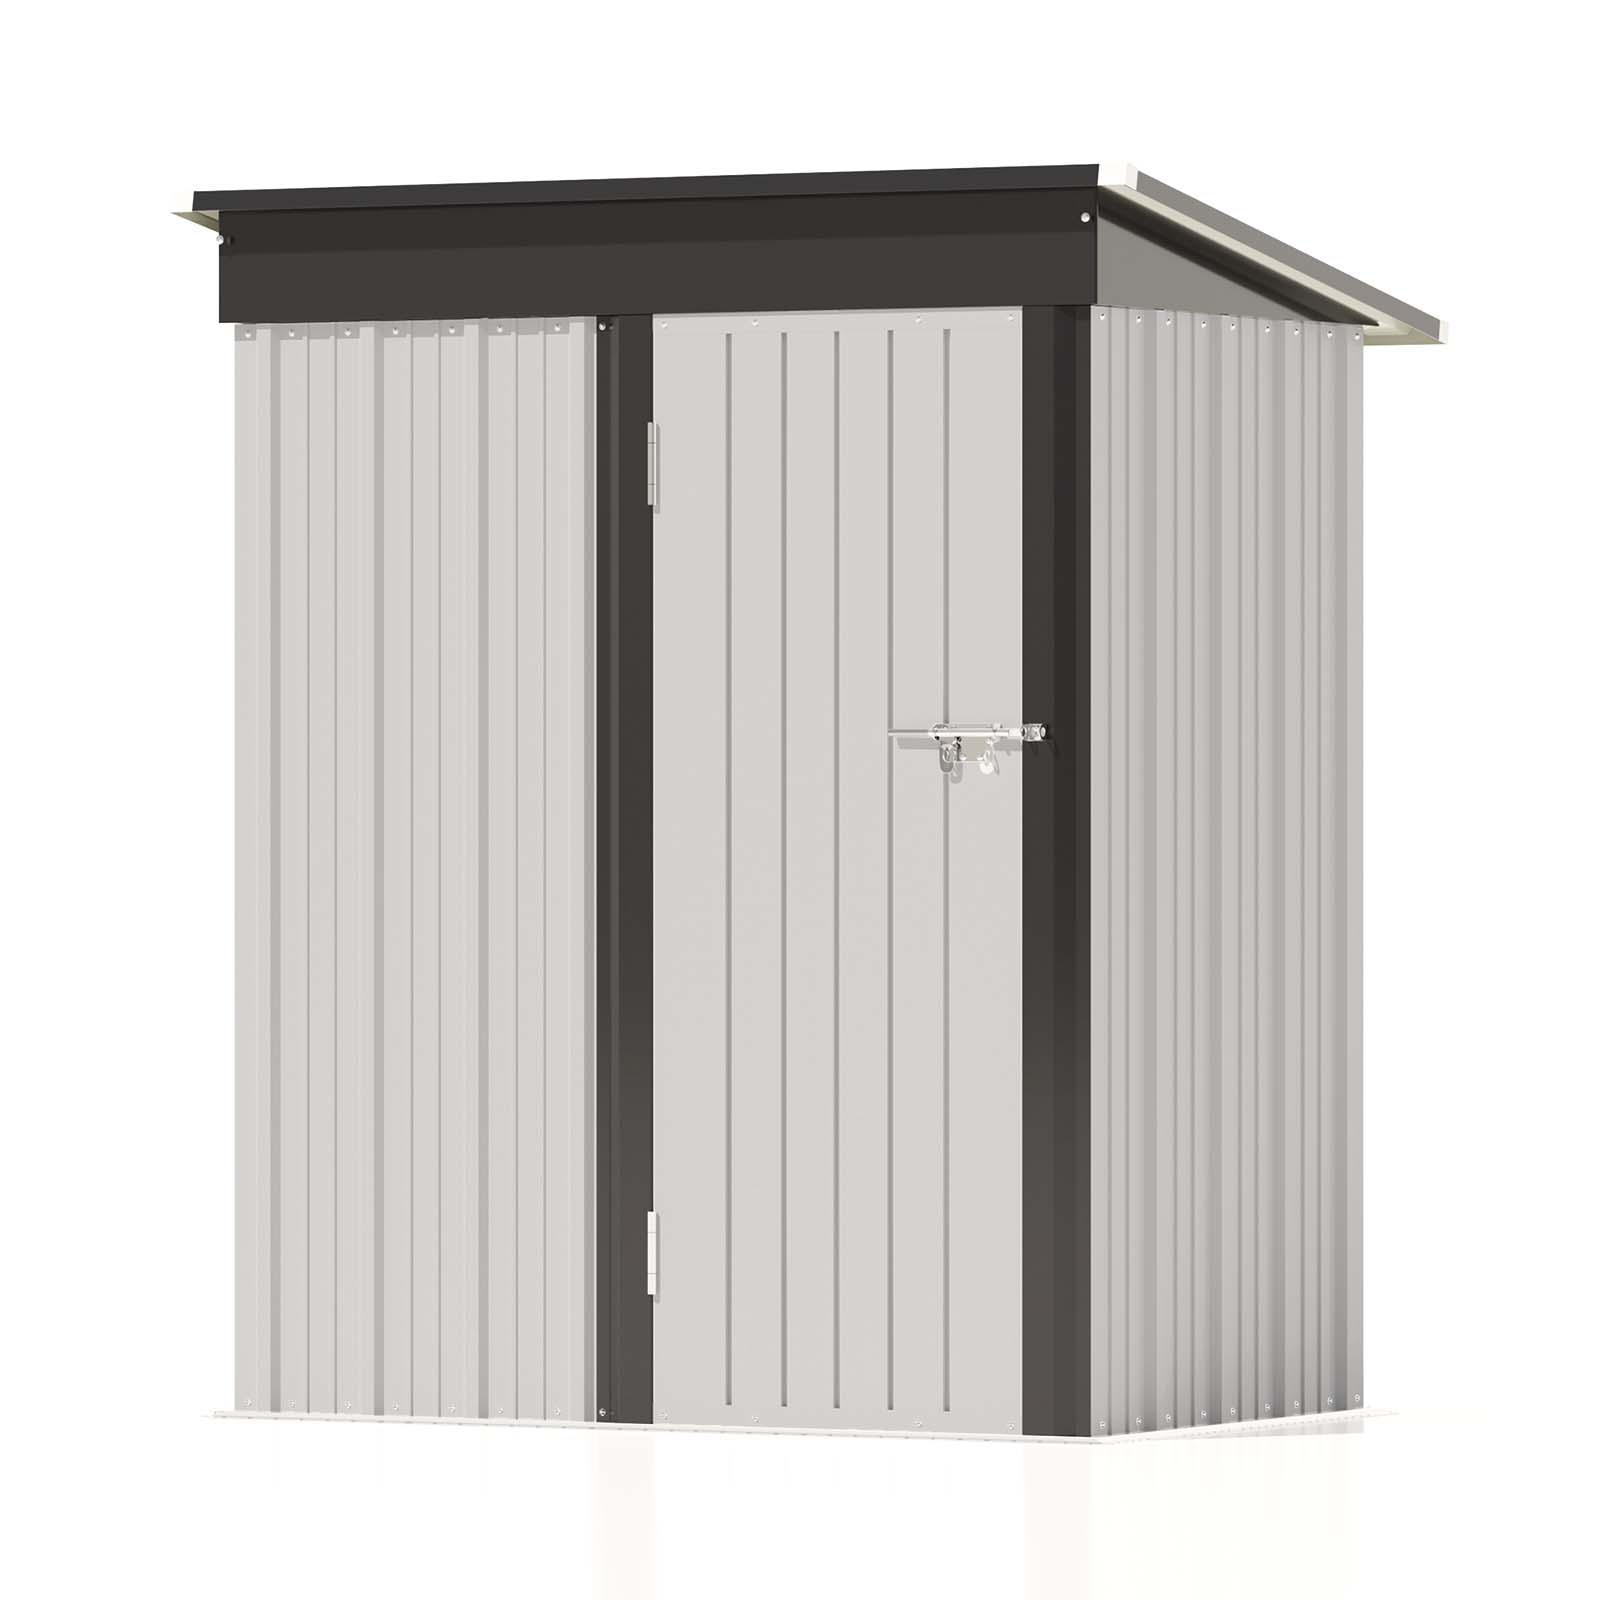 Patiowell 5x3 Metal Shed-Pure White